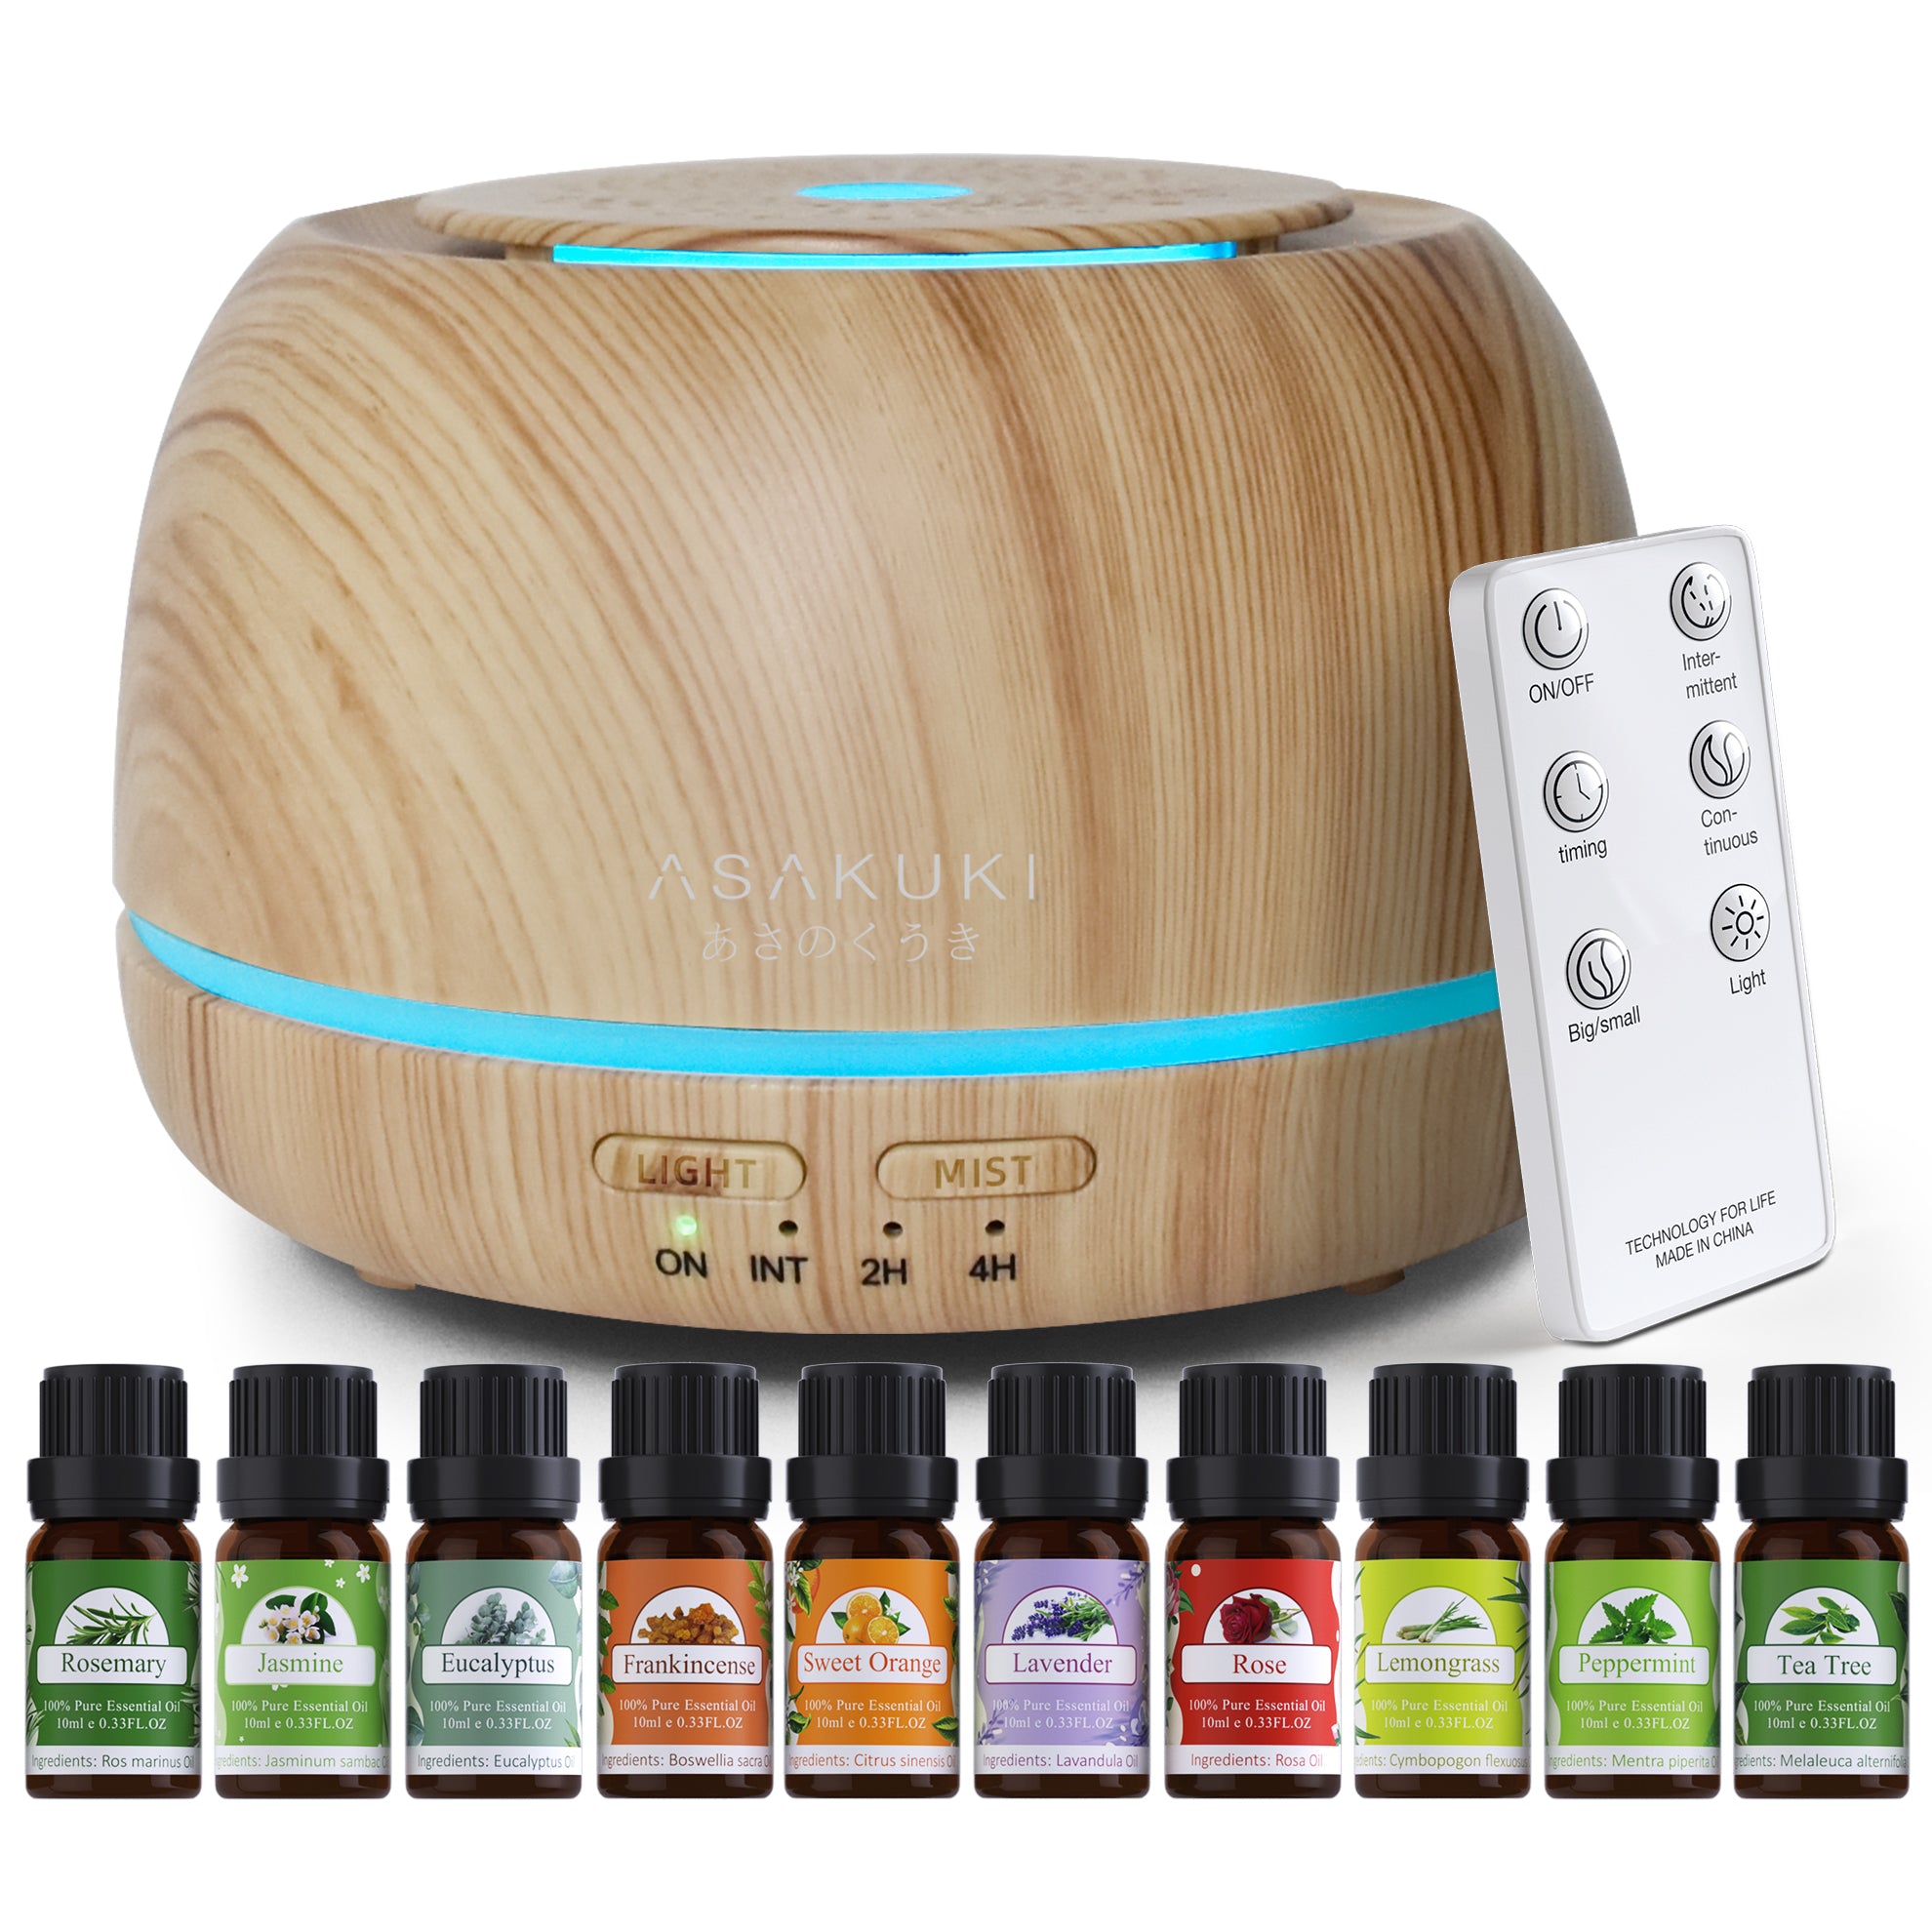 ASAKUKI 300ml Essential Oil Diffusers with 10Pcs*10ml Pure Essential Oil Gift Set